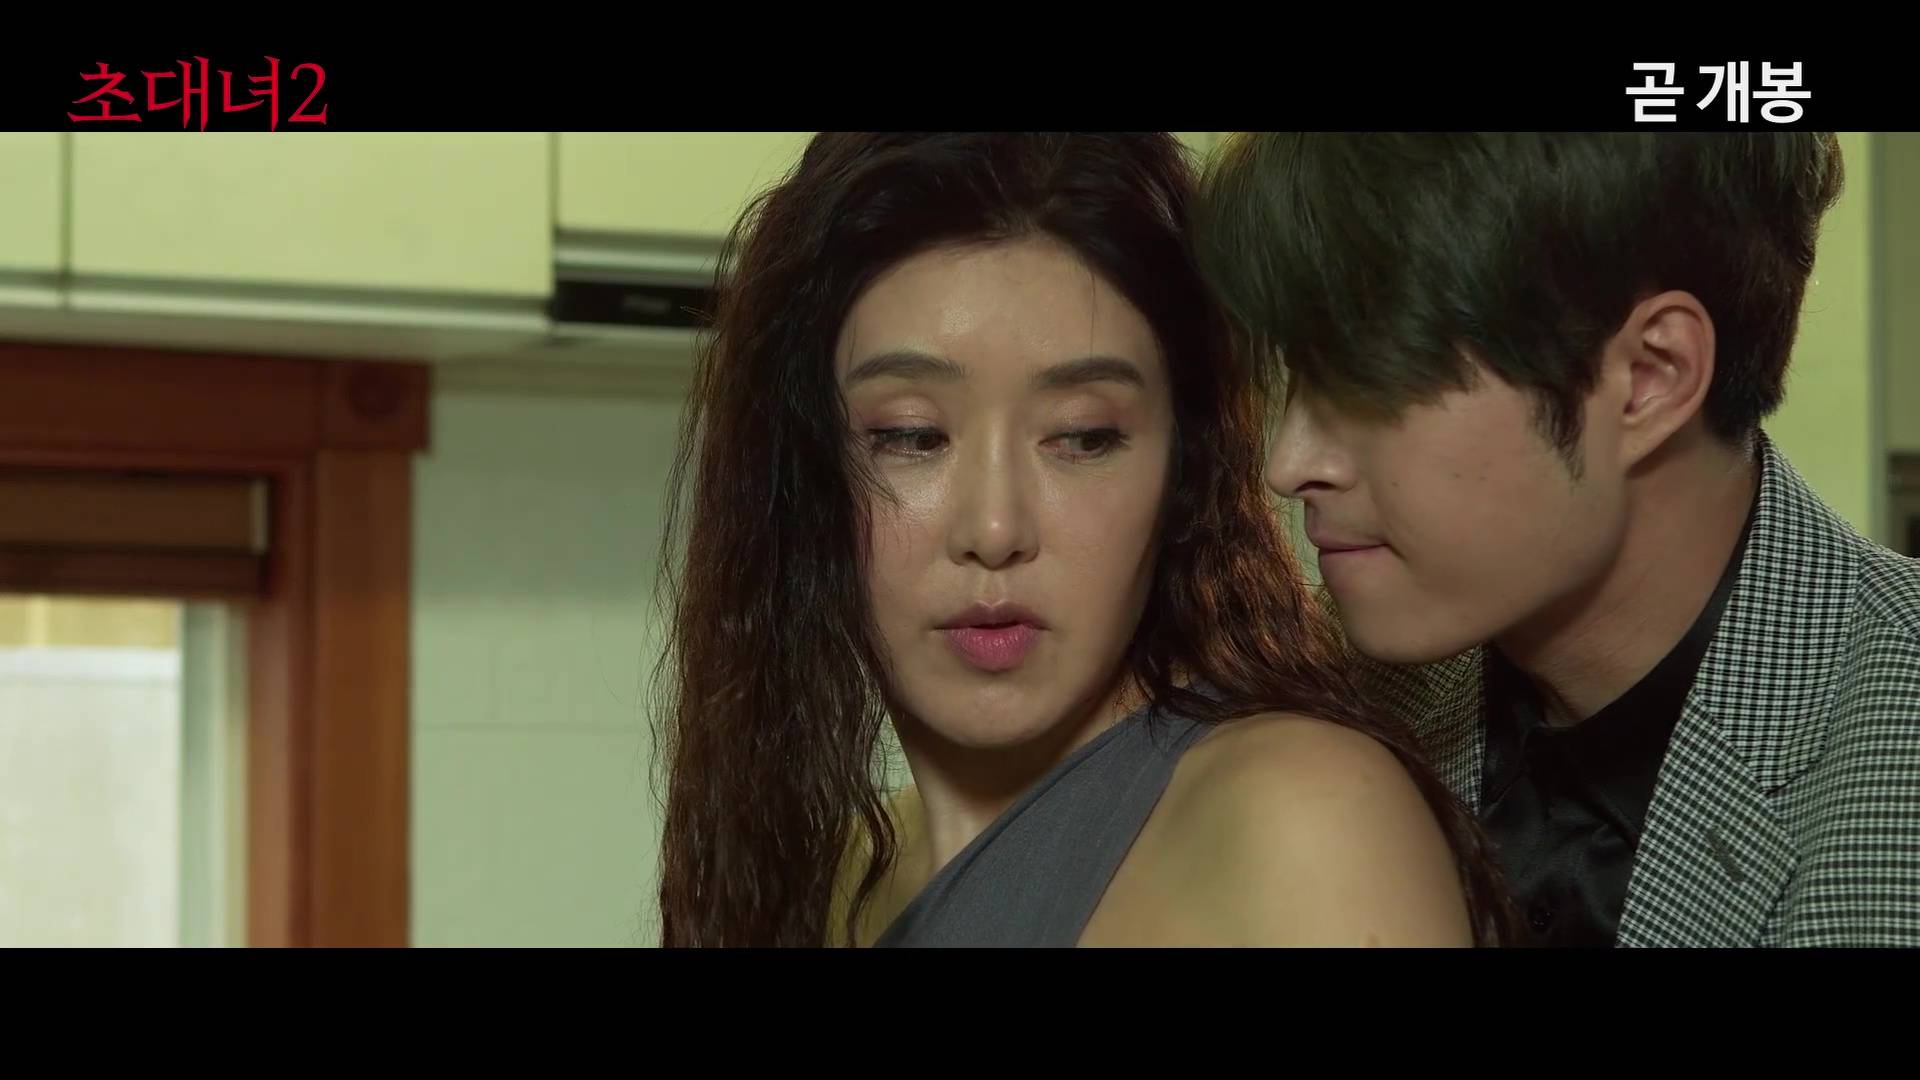 [Videos] Trailers added for the upcoming Korean movie 'Invitation Girl